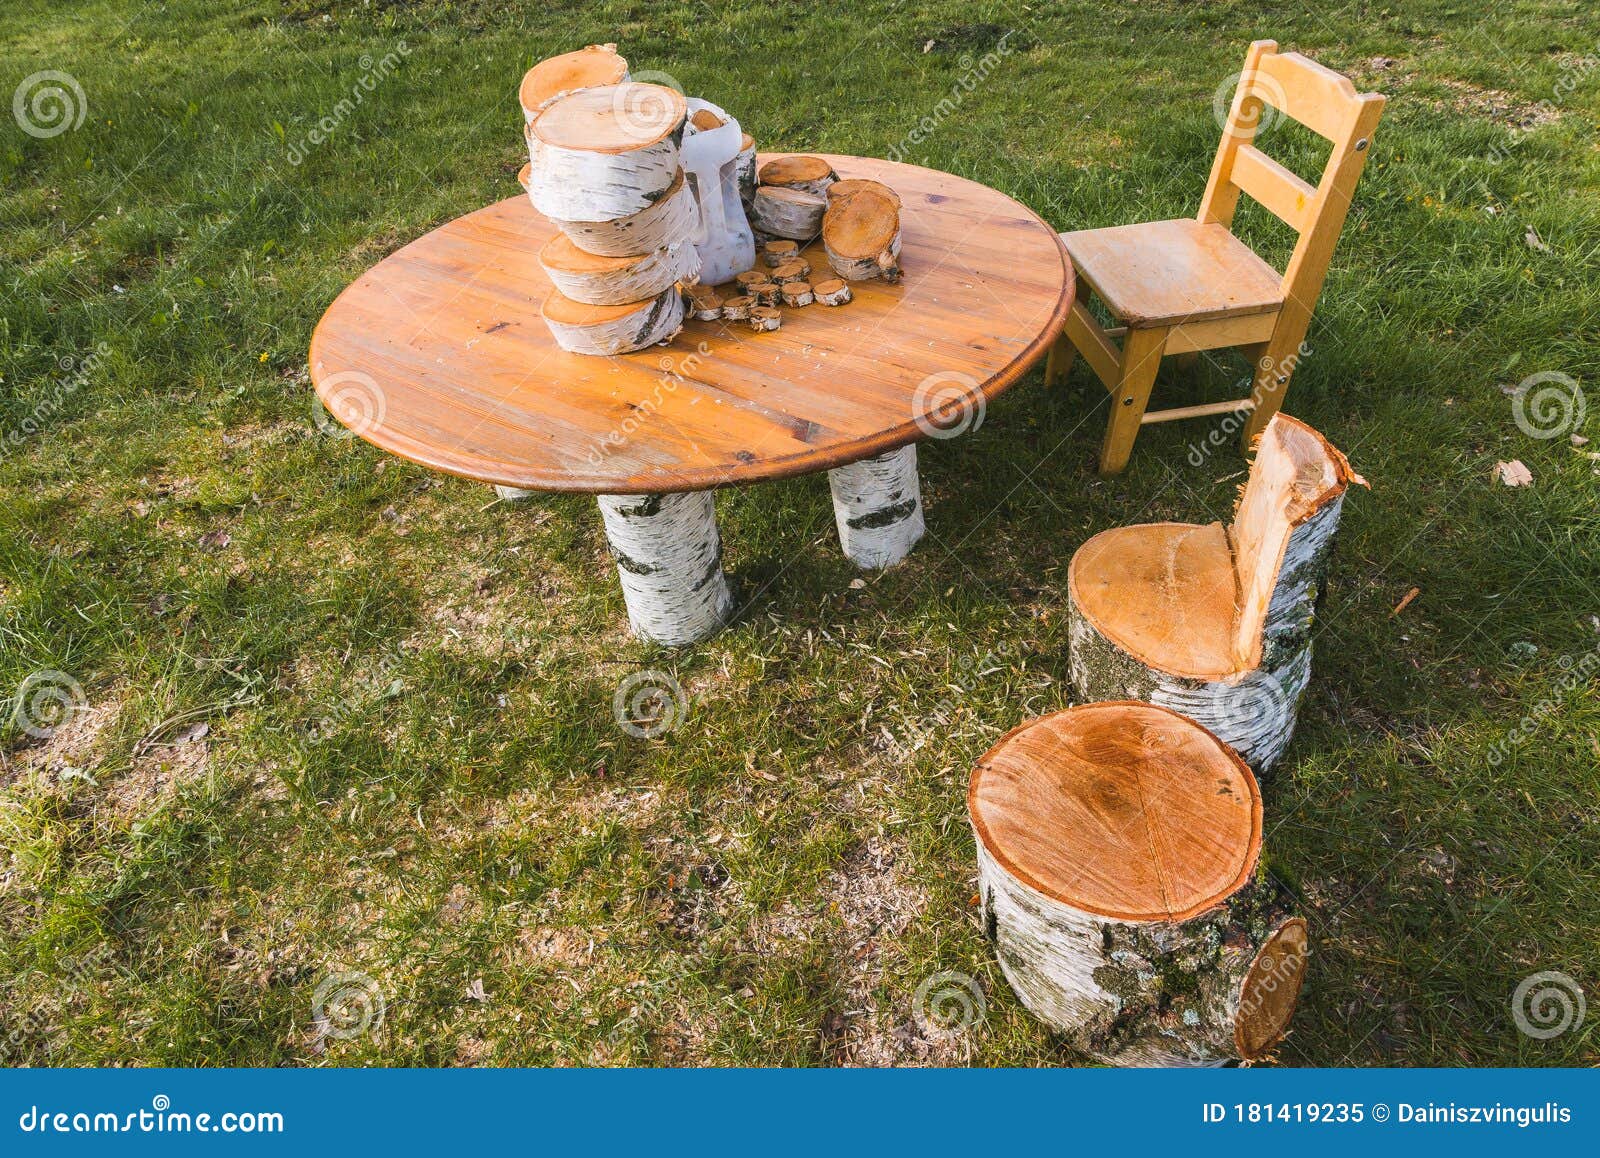 A Round Table Of Natural Wood Stock Image - Image of chair, discs: 181419235